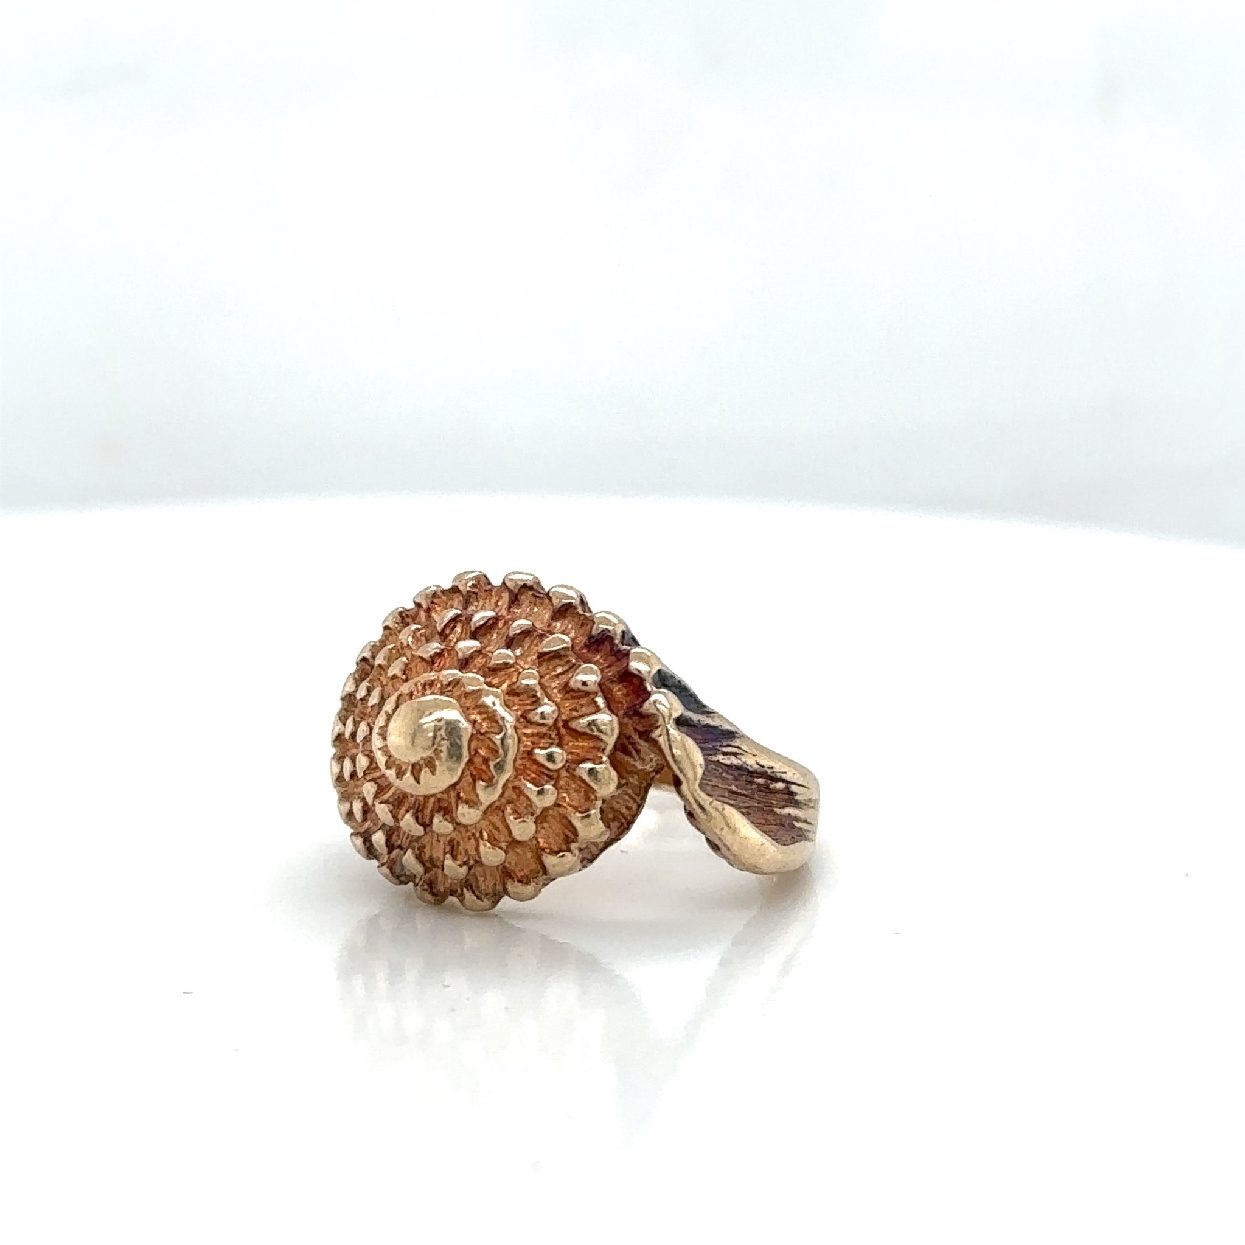 14K Yellow Gold Conch Shell Ring

Size 4.5 with Speedbumps
